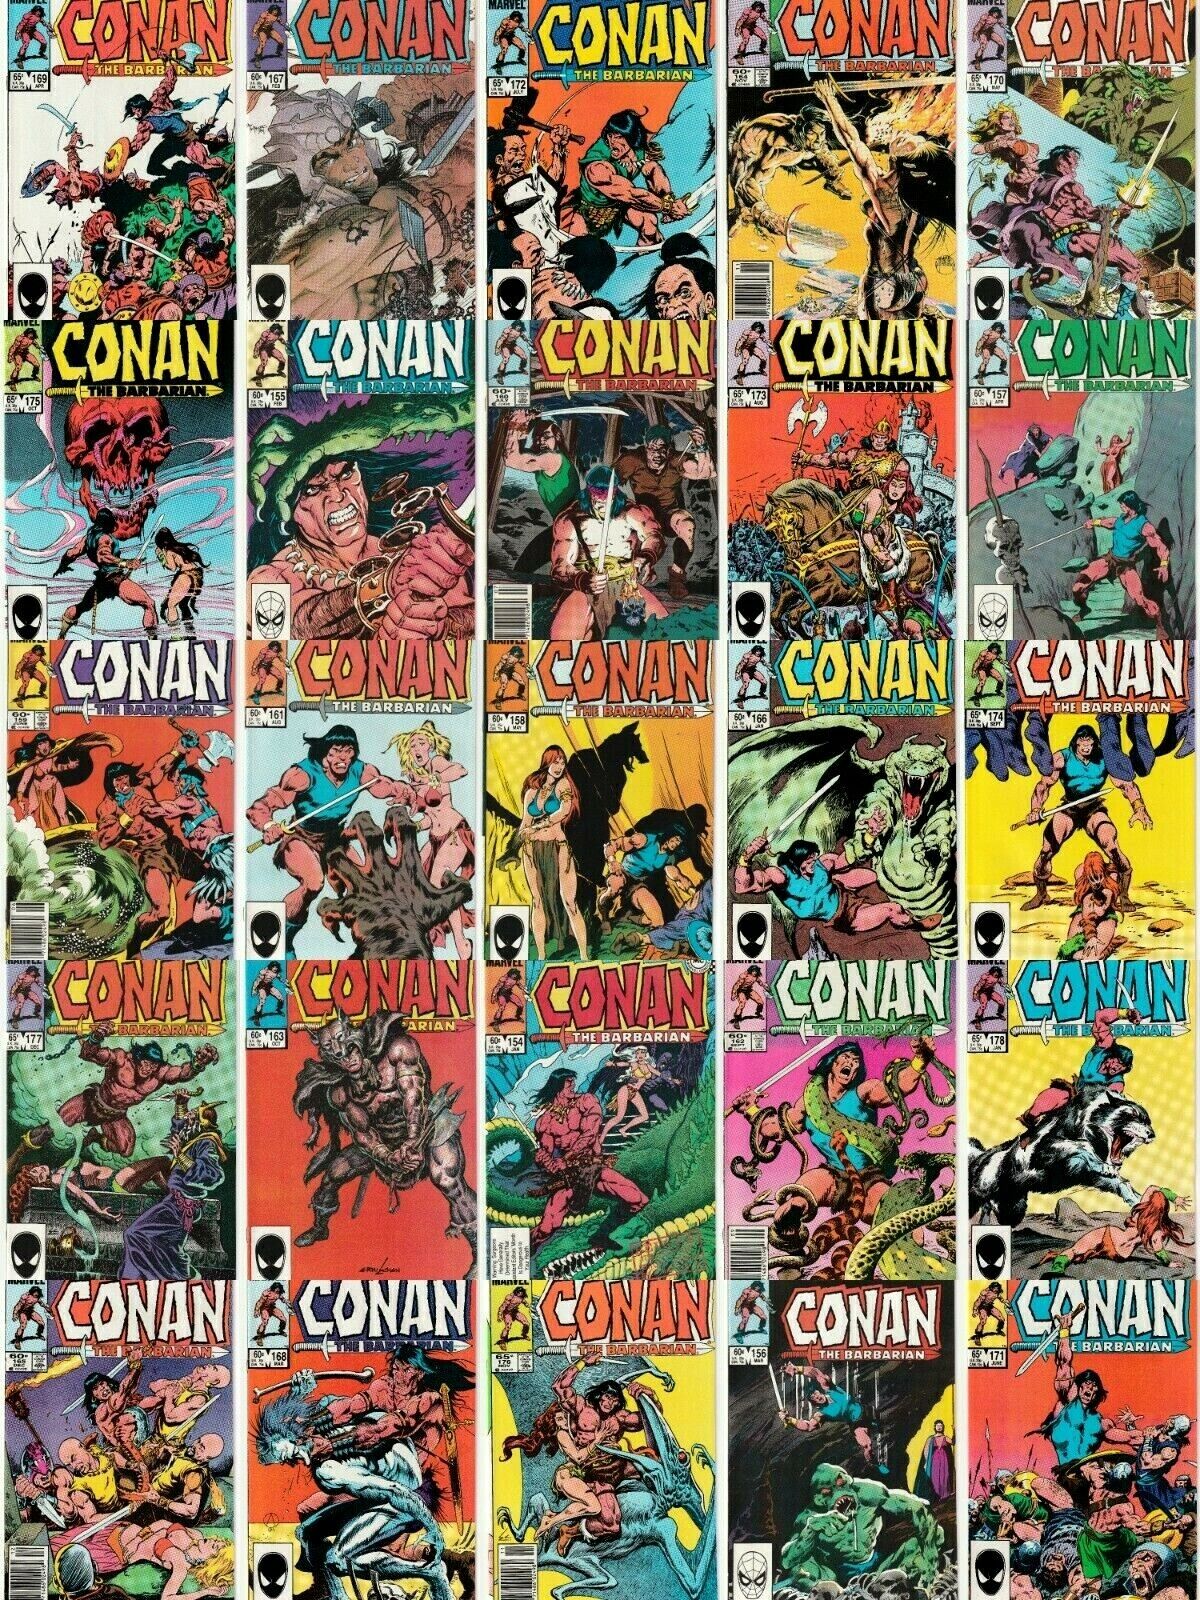 CONAN COMICS VOL 1 ISSUES #151 - 269 YOU PICK - COMPLETE YOUR RUN NEW TV SERIES